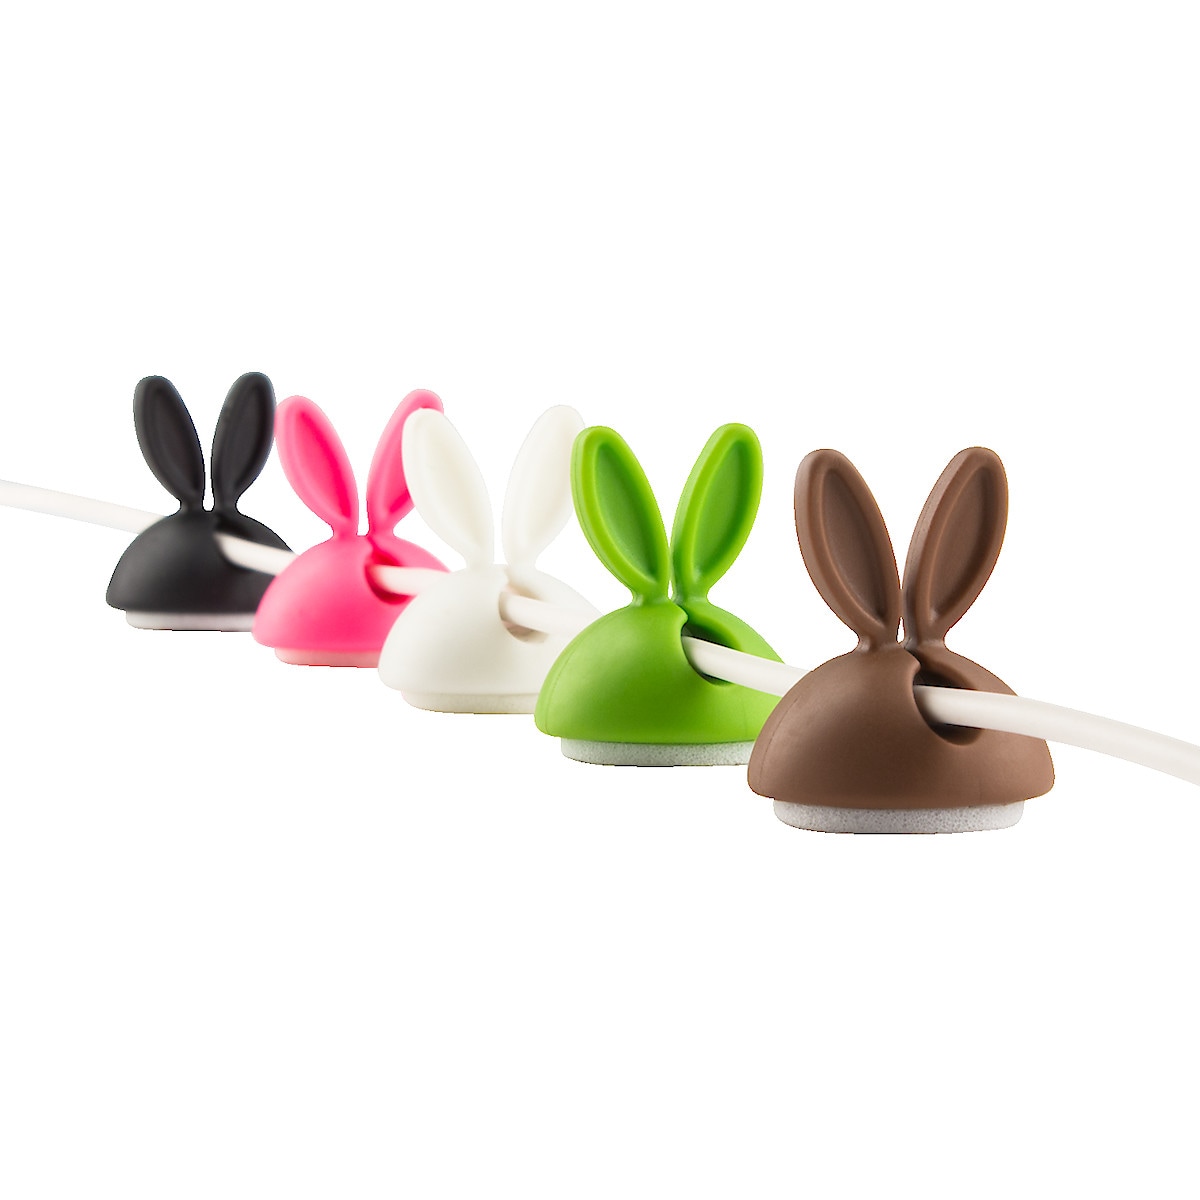 Kabelhållare Cable Candy Bunny Beans 5-pack